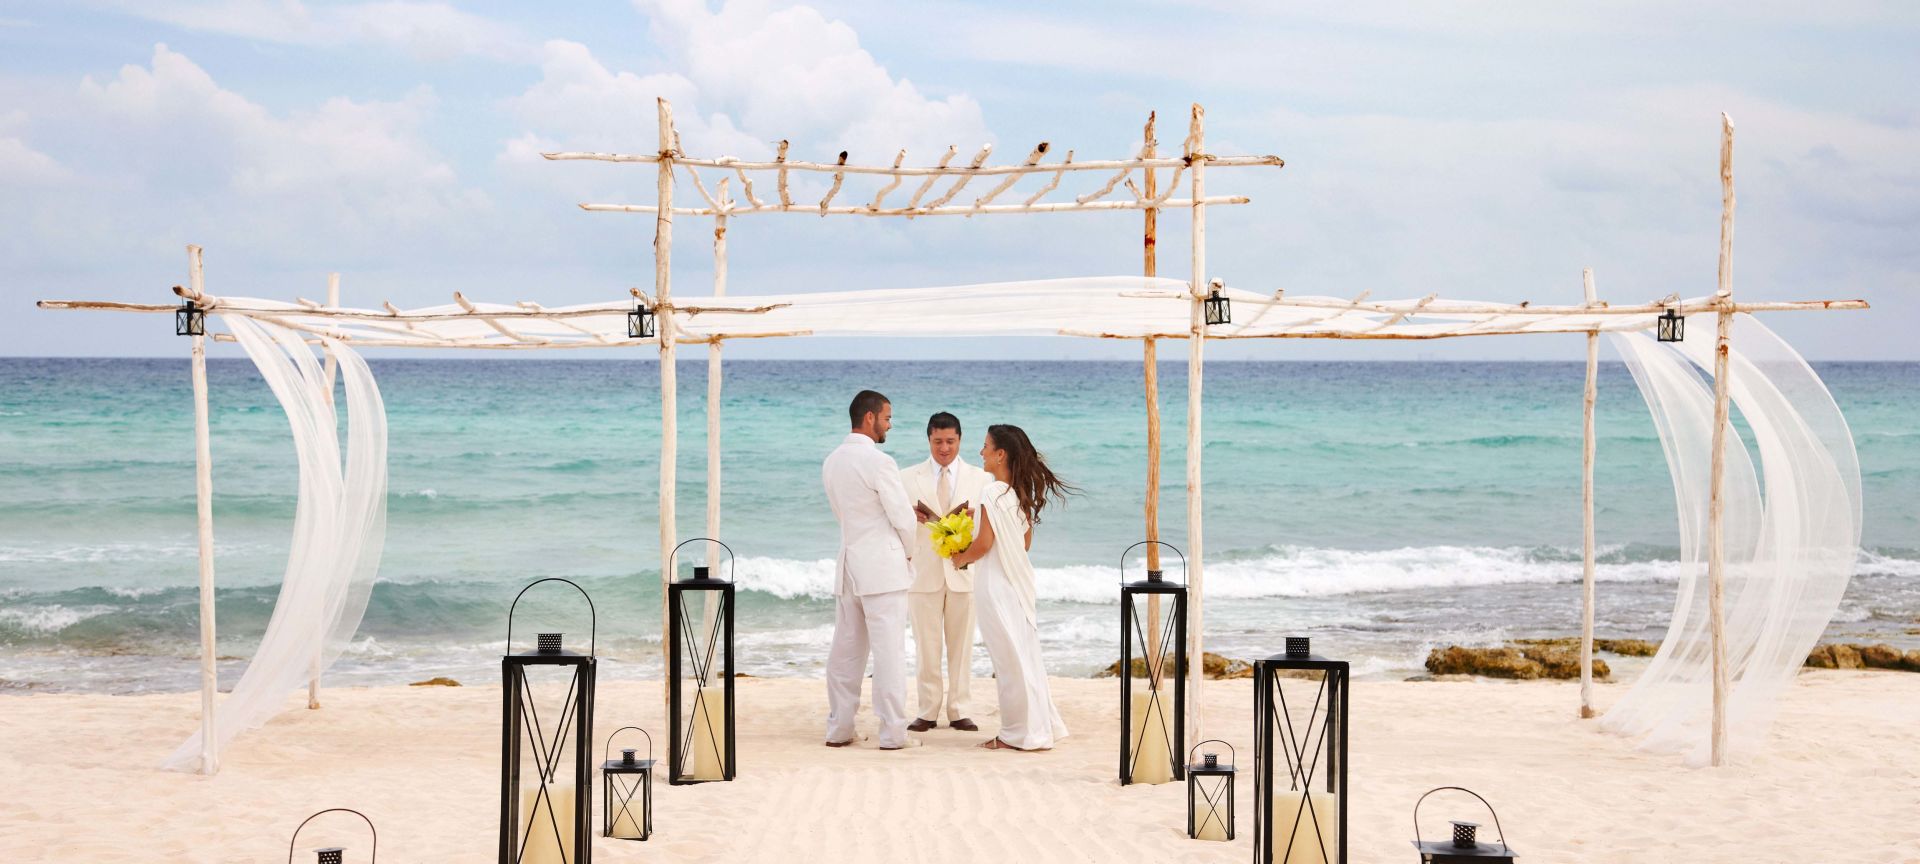 Why You Should Plan Your Wedding In Riviera Maya